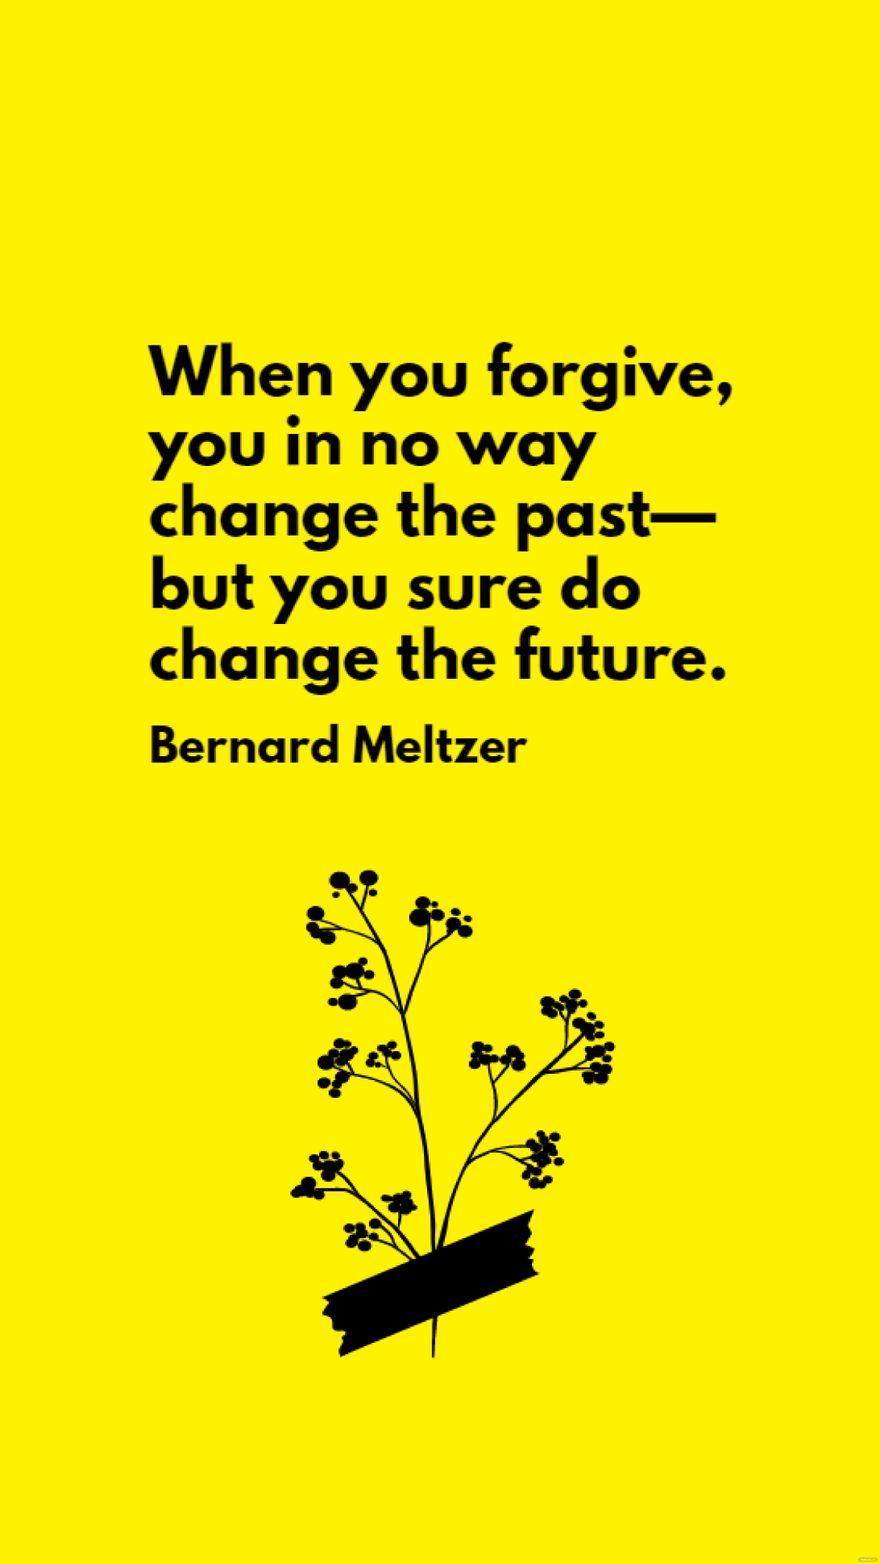 Free Bernard Meltzer - When you forgive, you in no way change the past - but you sure do change the future. in JPG